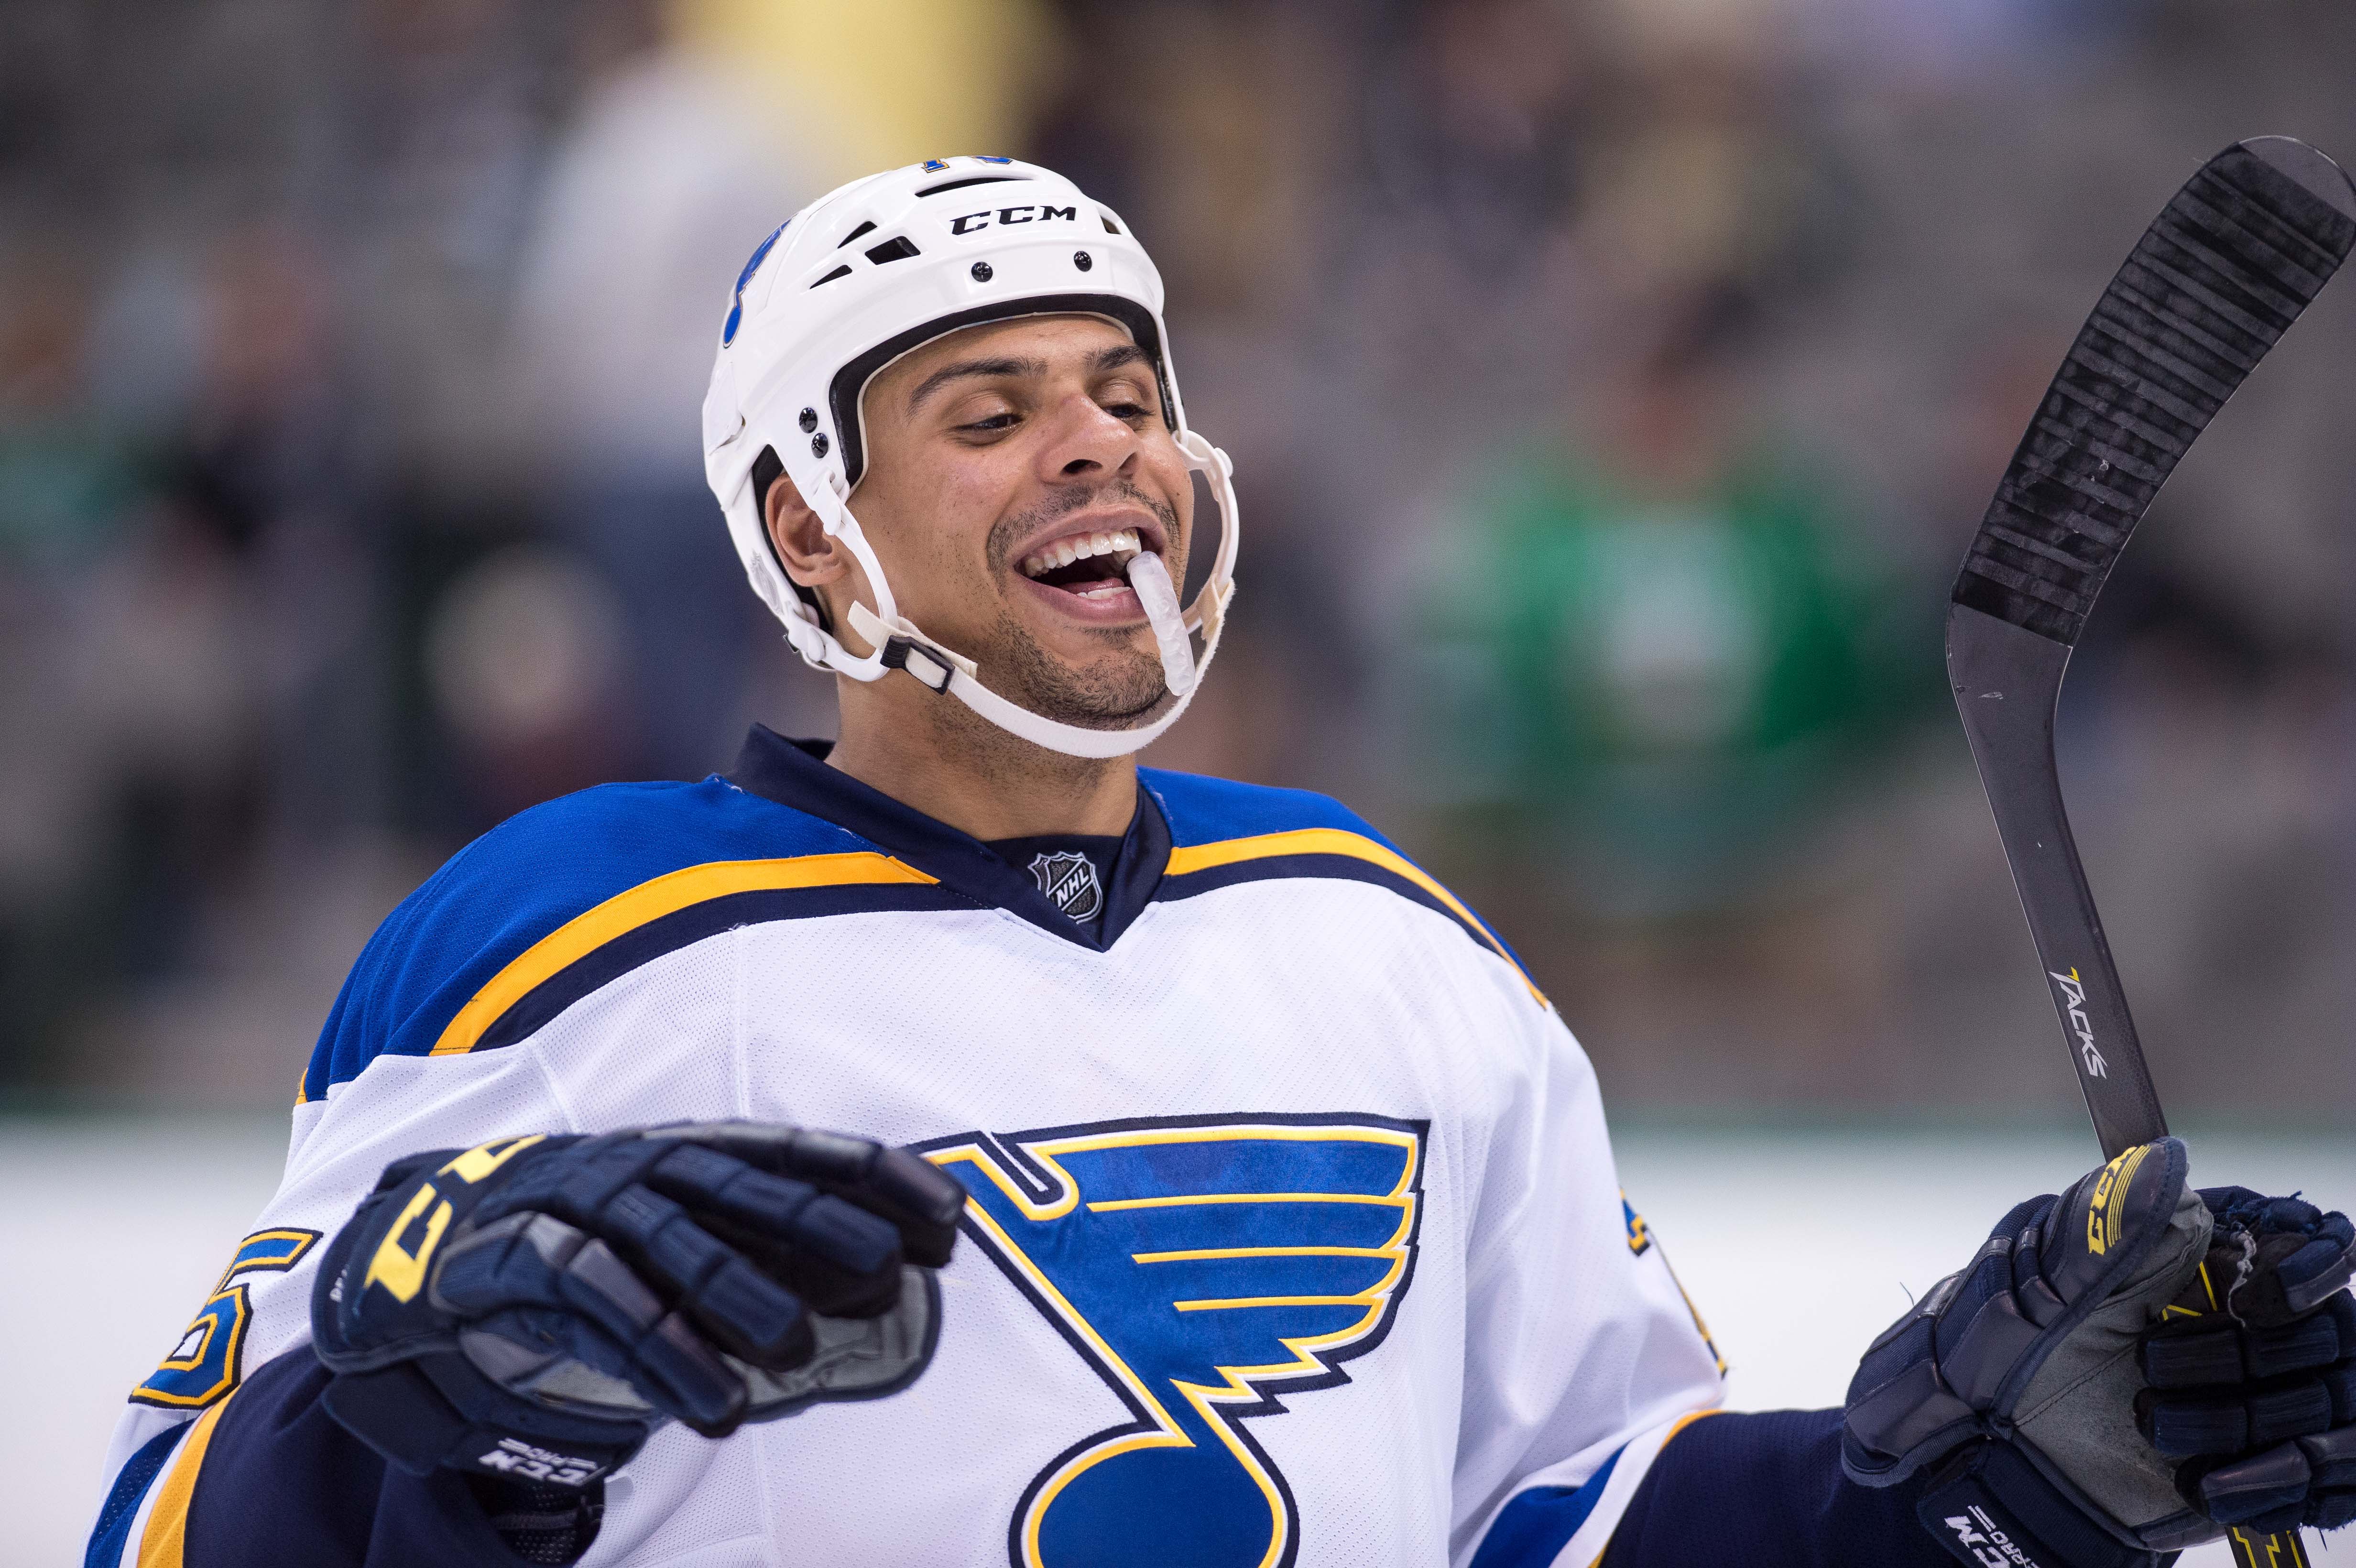 Blues' Ryan Reaves pulls his own tooth out after a massive hit from Hawks'  Brent Seabrook - The Hockey News